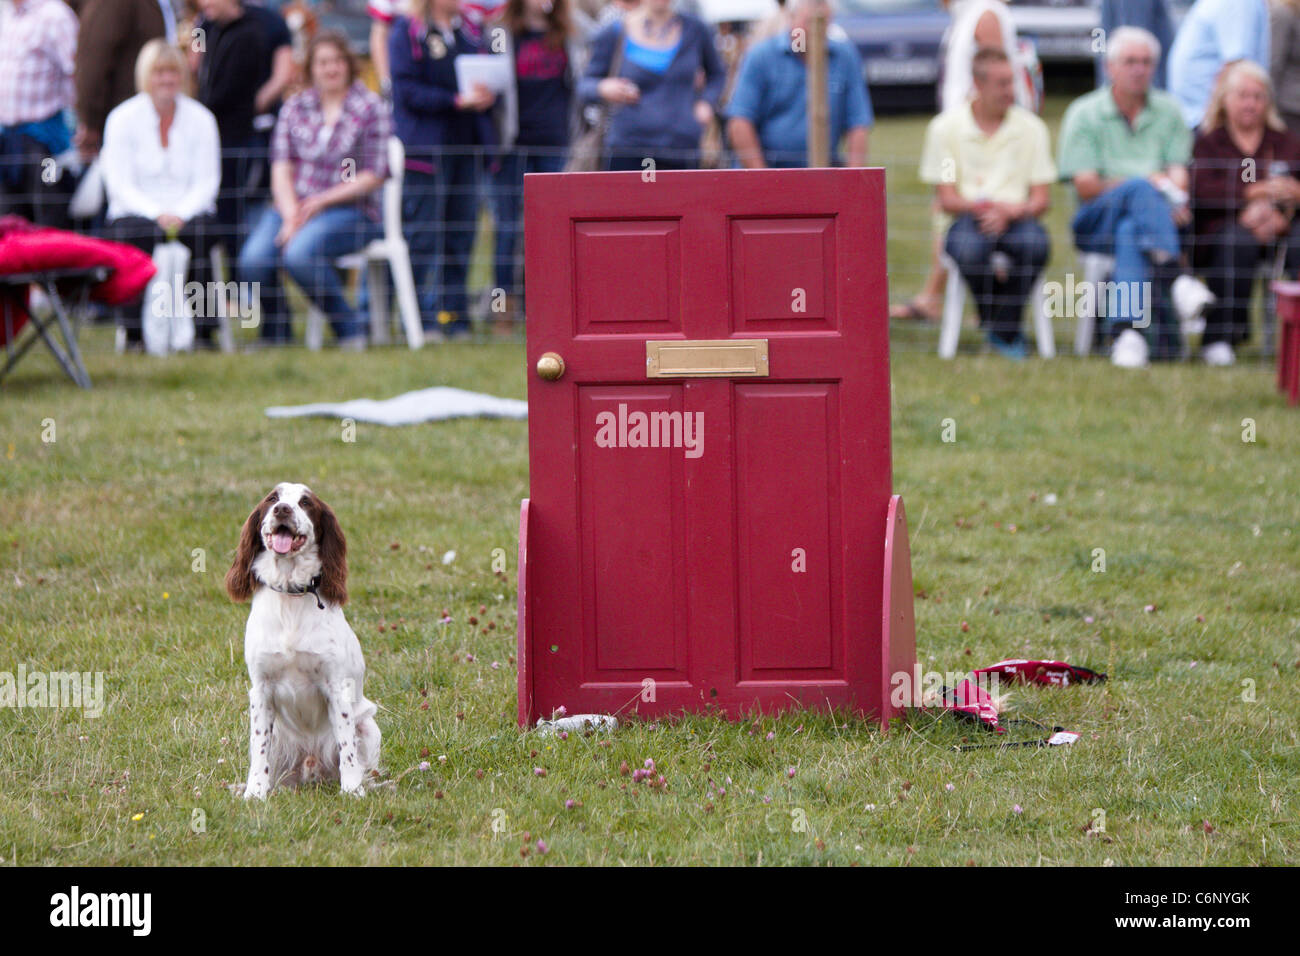 A hearing assistance dog shows how it is trained to react to a door bell at the Bucks County Show 2011 Stock Photo